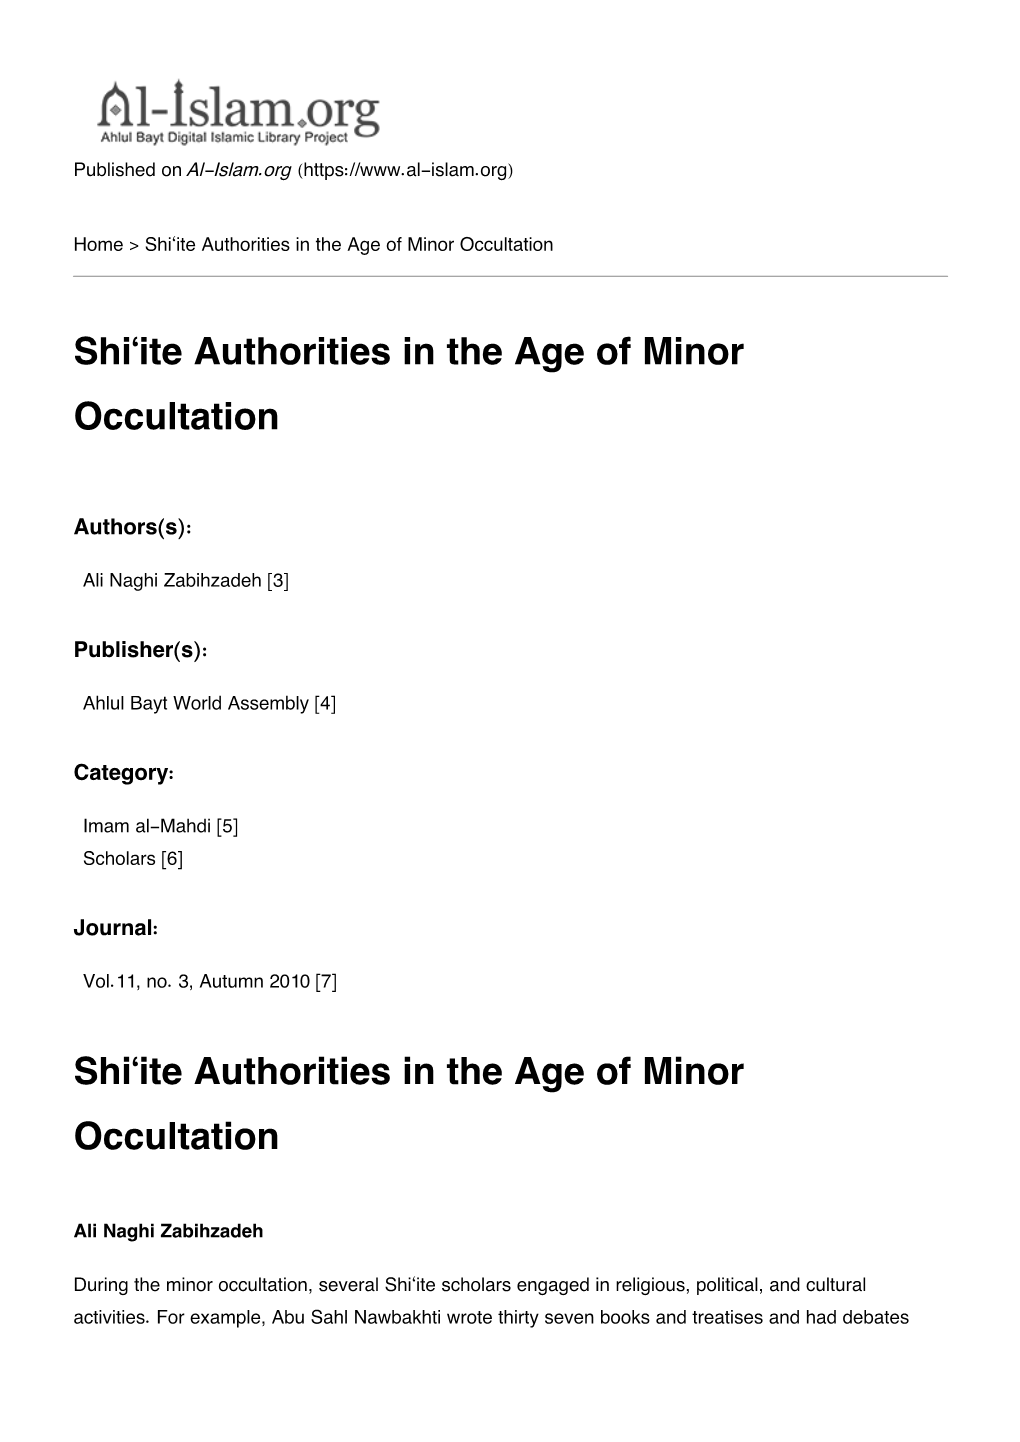 Shi'ite Authorities in the Age of Minor Occultation